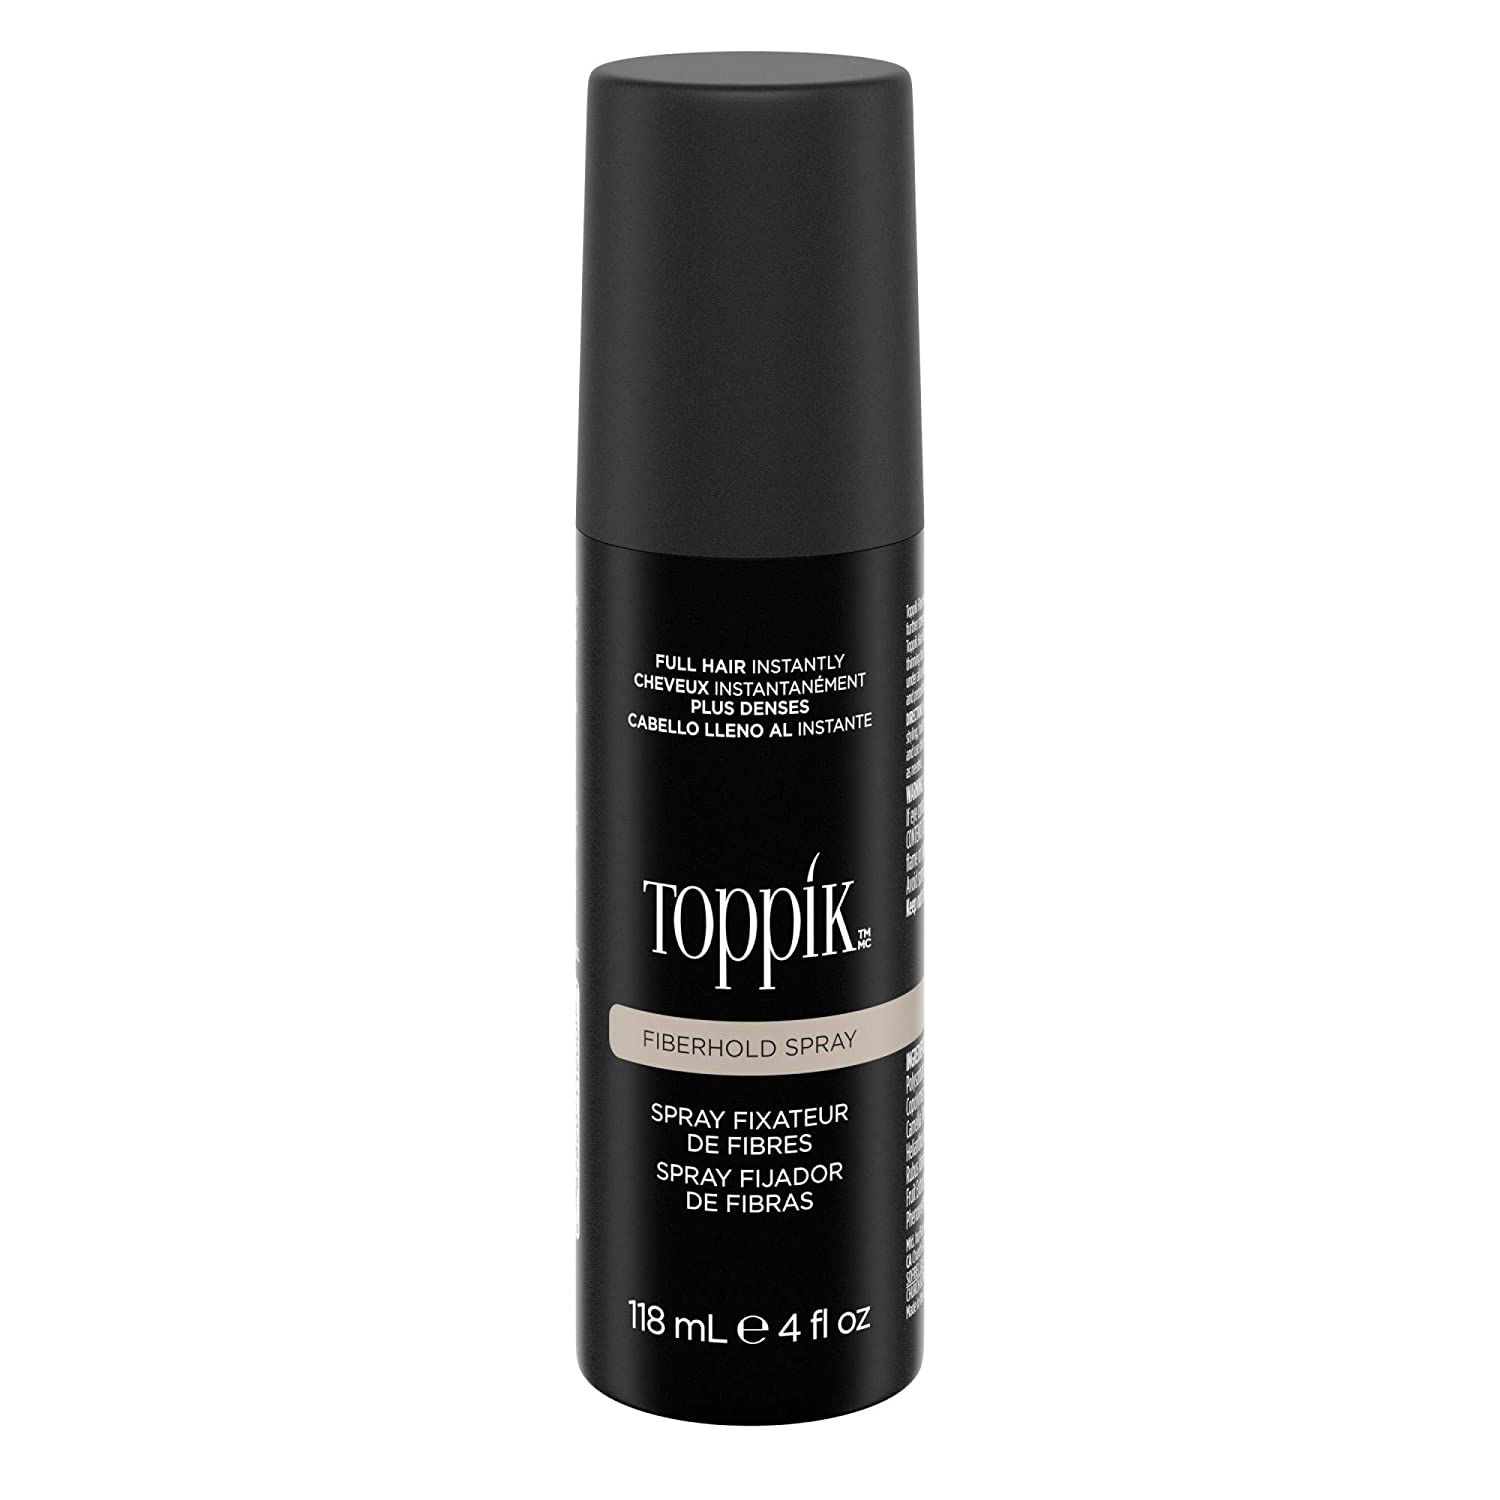 Toppik Fixing spray 118 ml, fixes hair fibres to your hair, for fuller looking hair